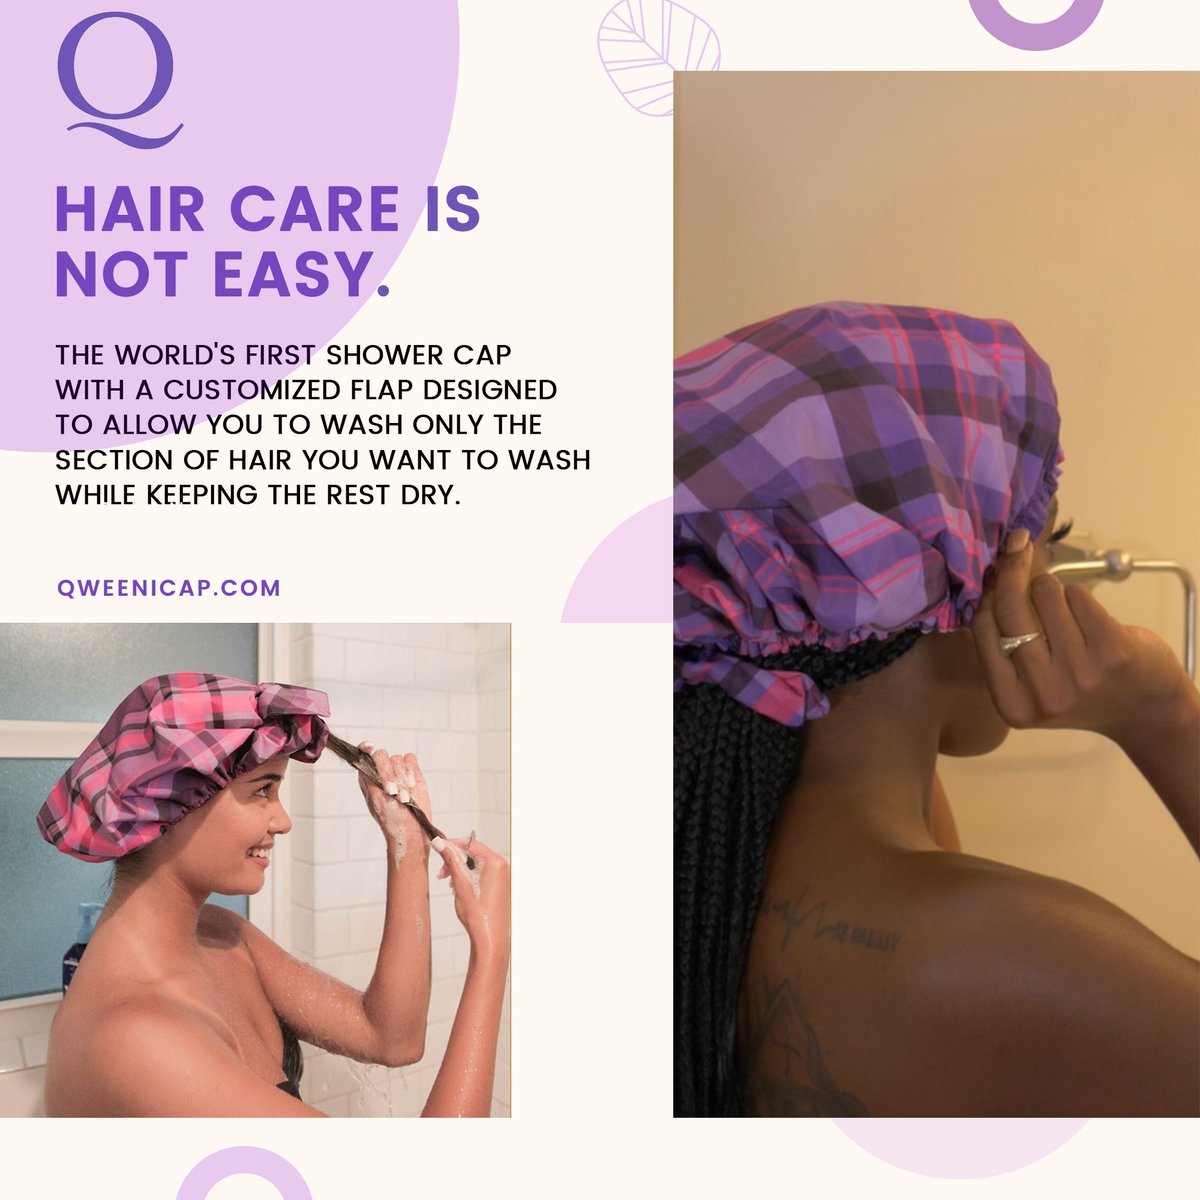 💇‍♀️Hair getting in the way of your royal duties?👸 The Qweeni Cap’s snappable opening lets you decide which portions are ready for a wash! 🚿 TRADE SHOW SEASON IS HERE 🎈Get 30% off with code 30OFF. #PartialHairWashing #SaveTime
.
.
.
#Qweenicap #haircare #hair #hairstyle ...